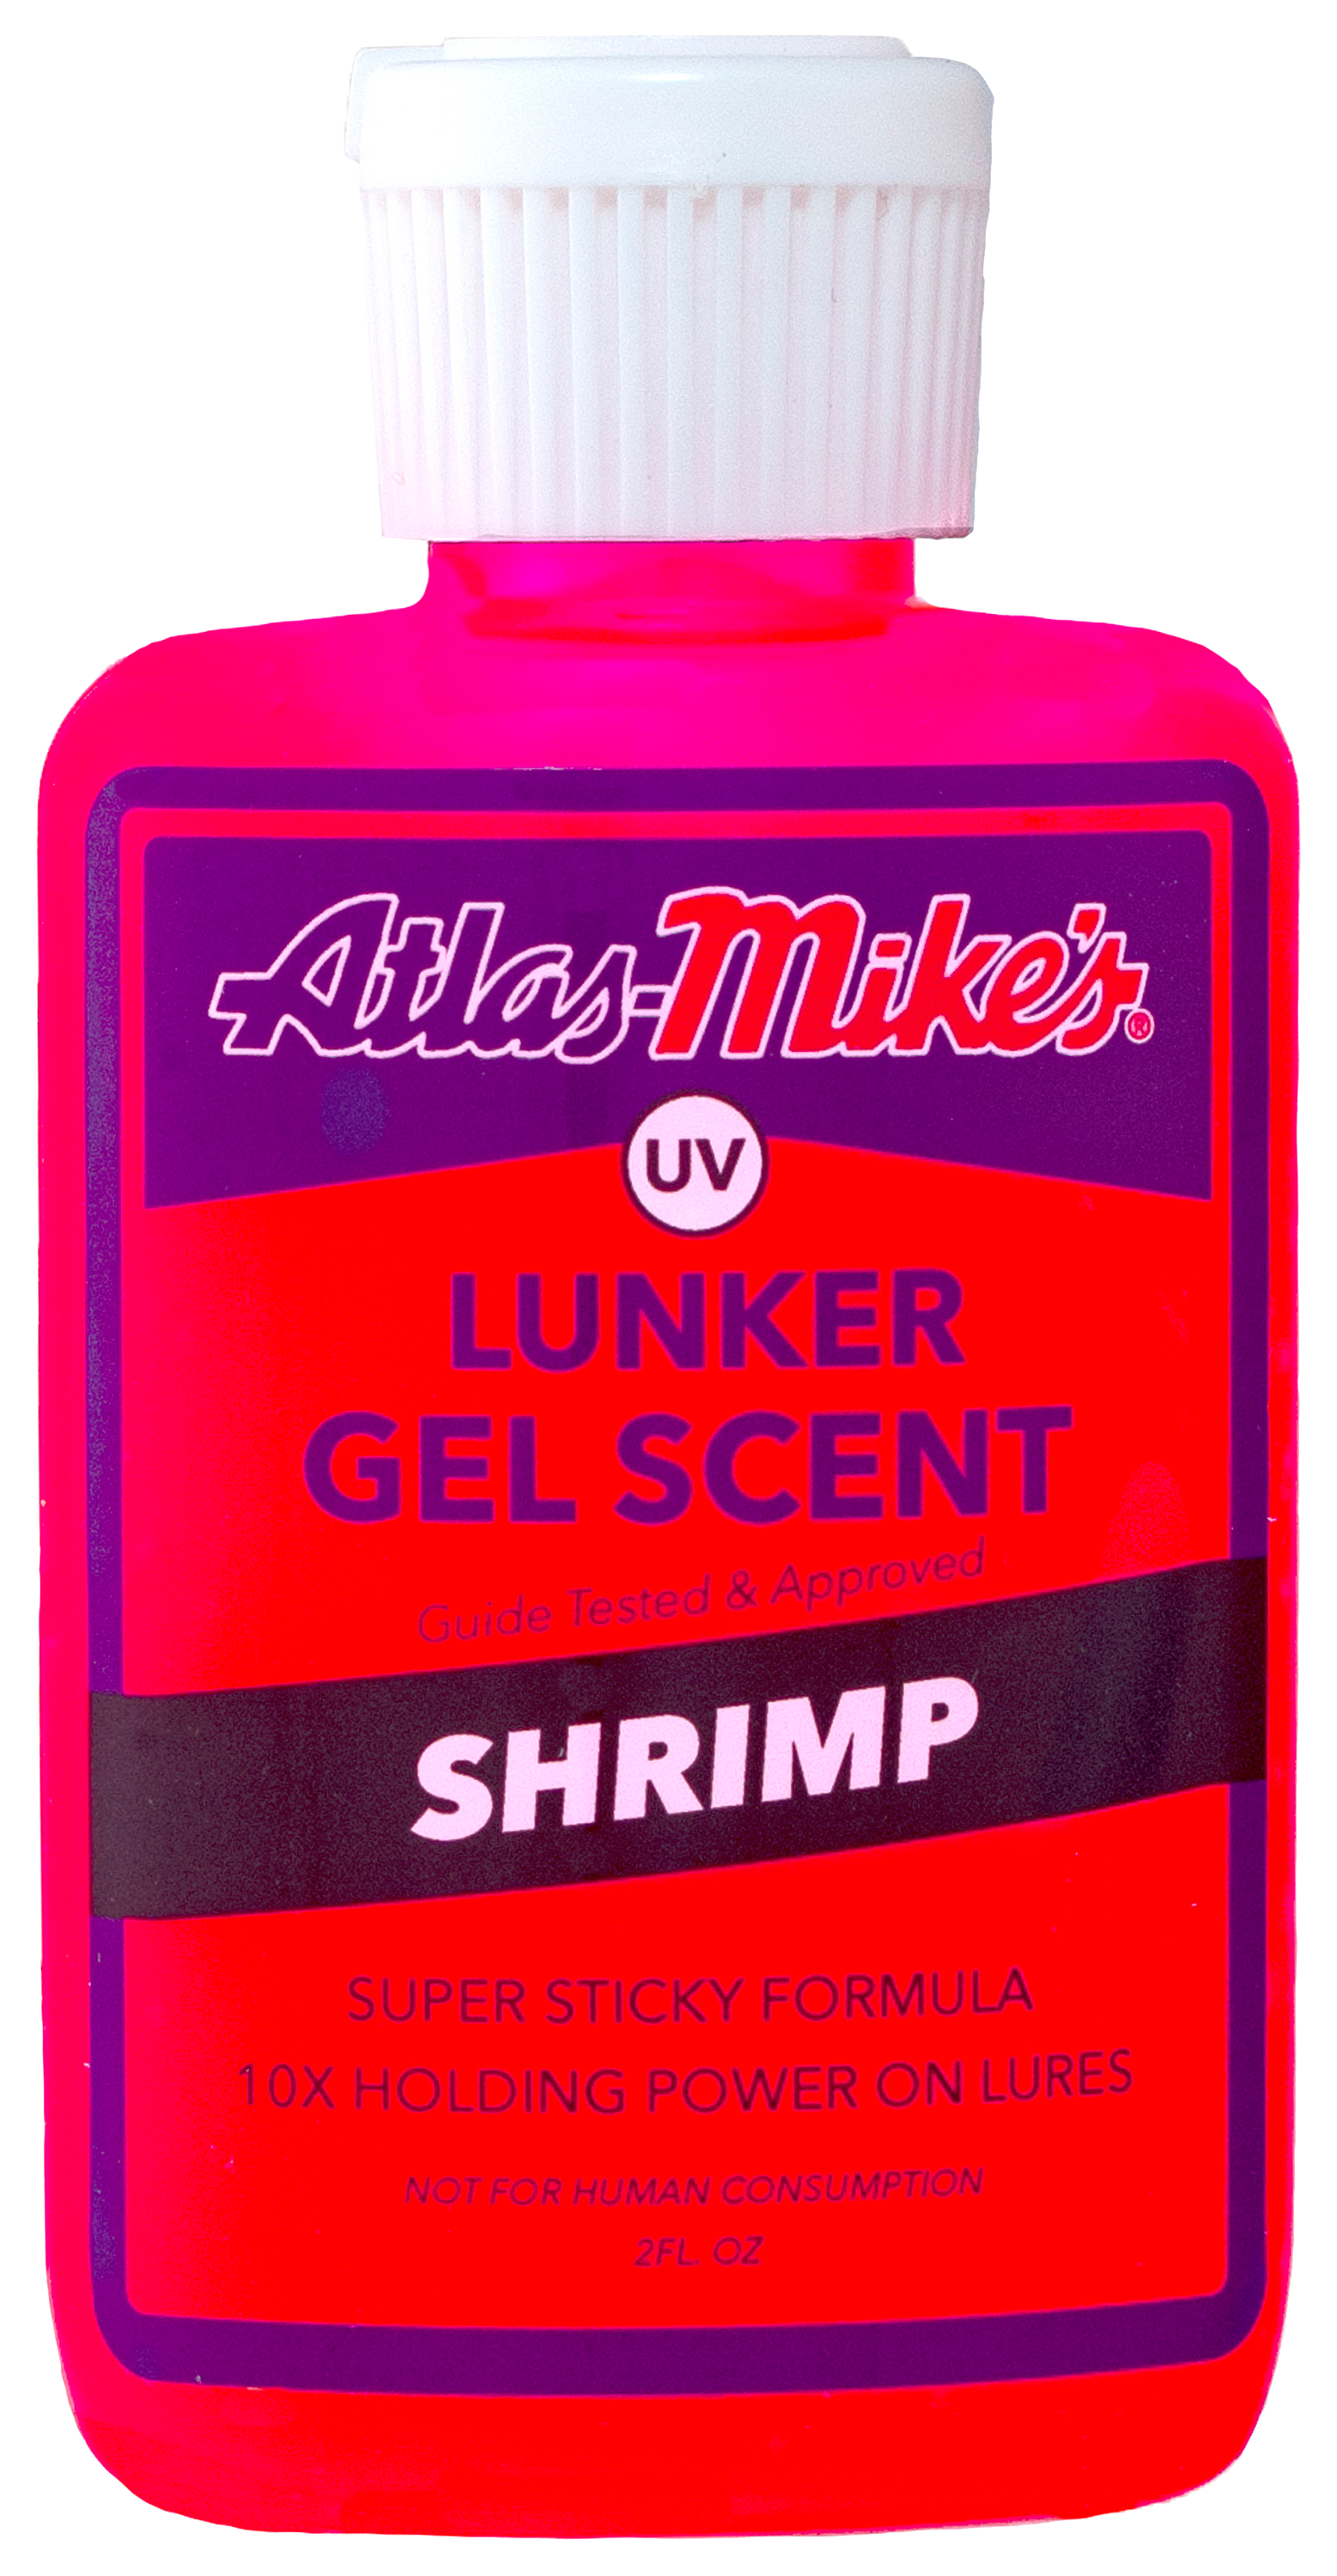 Mike's Lunker Lotion - Herring Anise